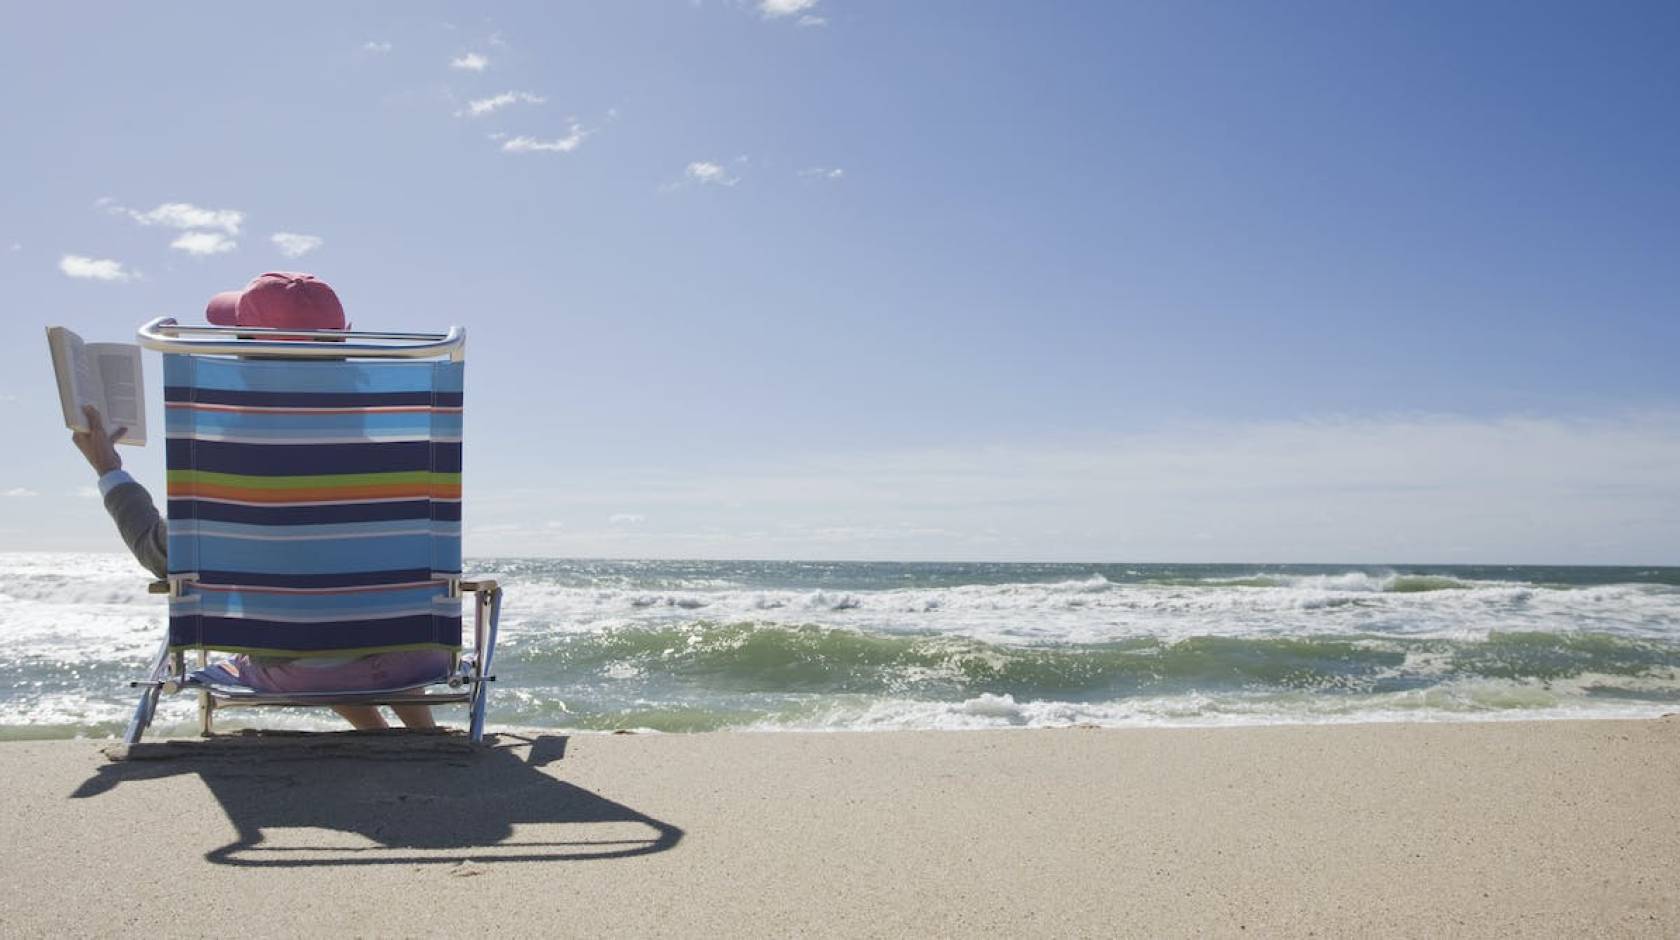 Person reading on the beach, photographed from the back with the ocean in front